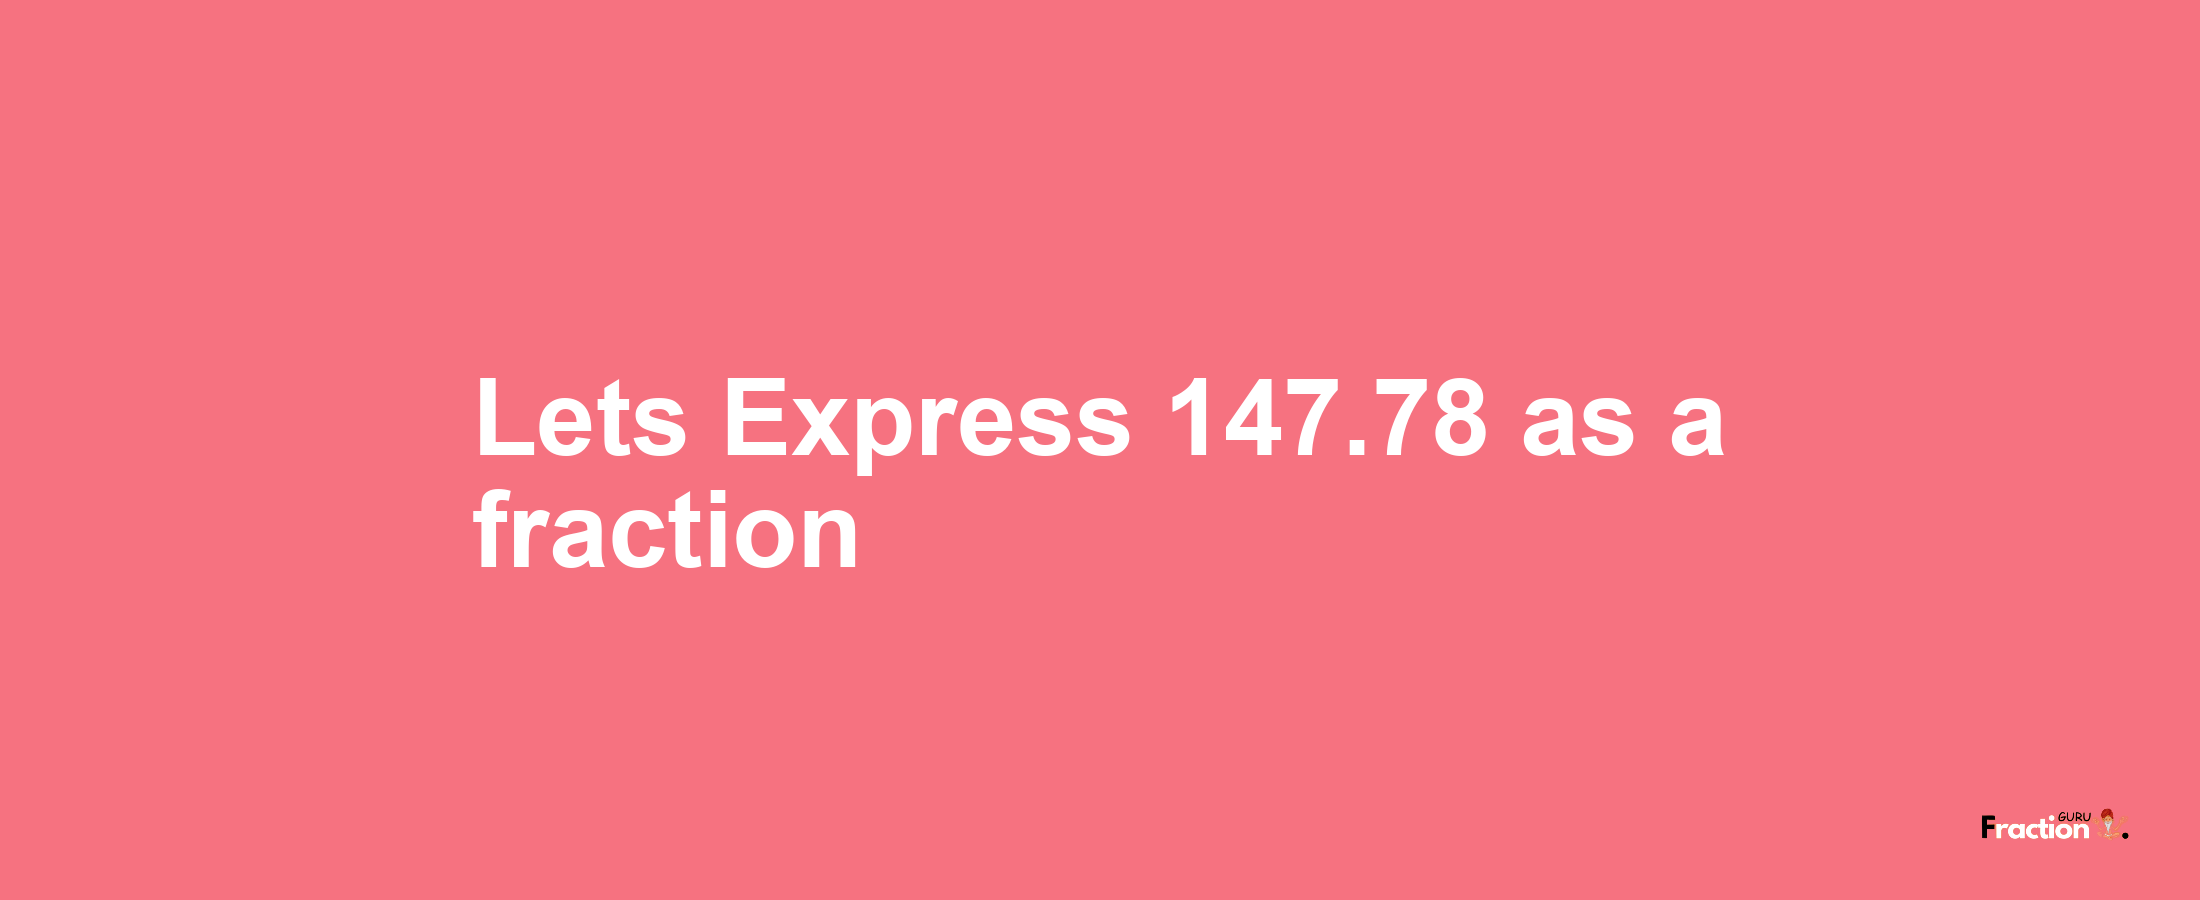 Lets Express 147.78 as afraction